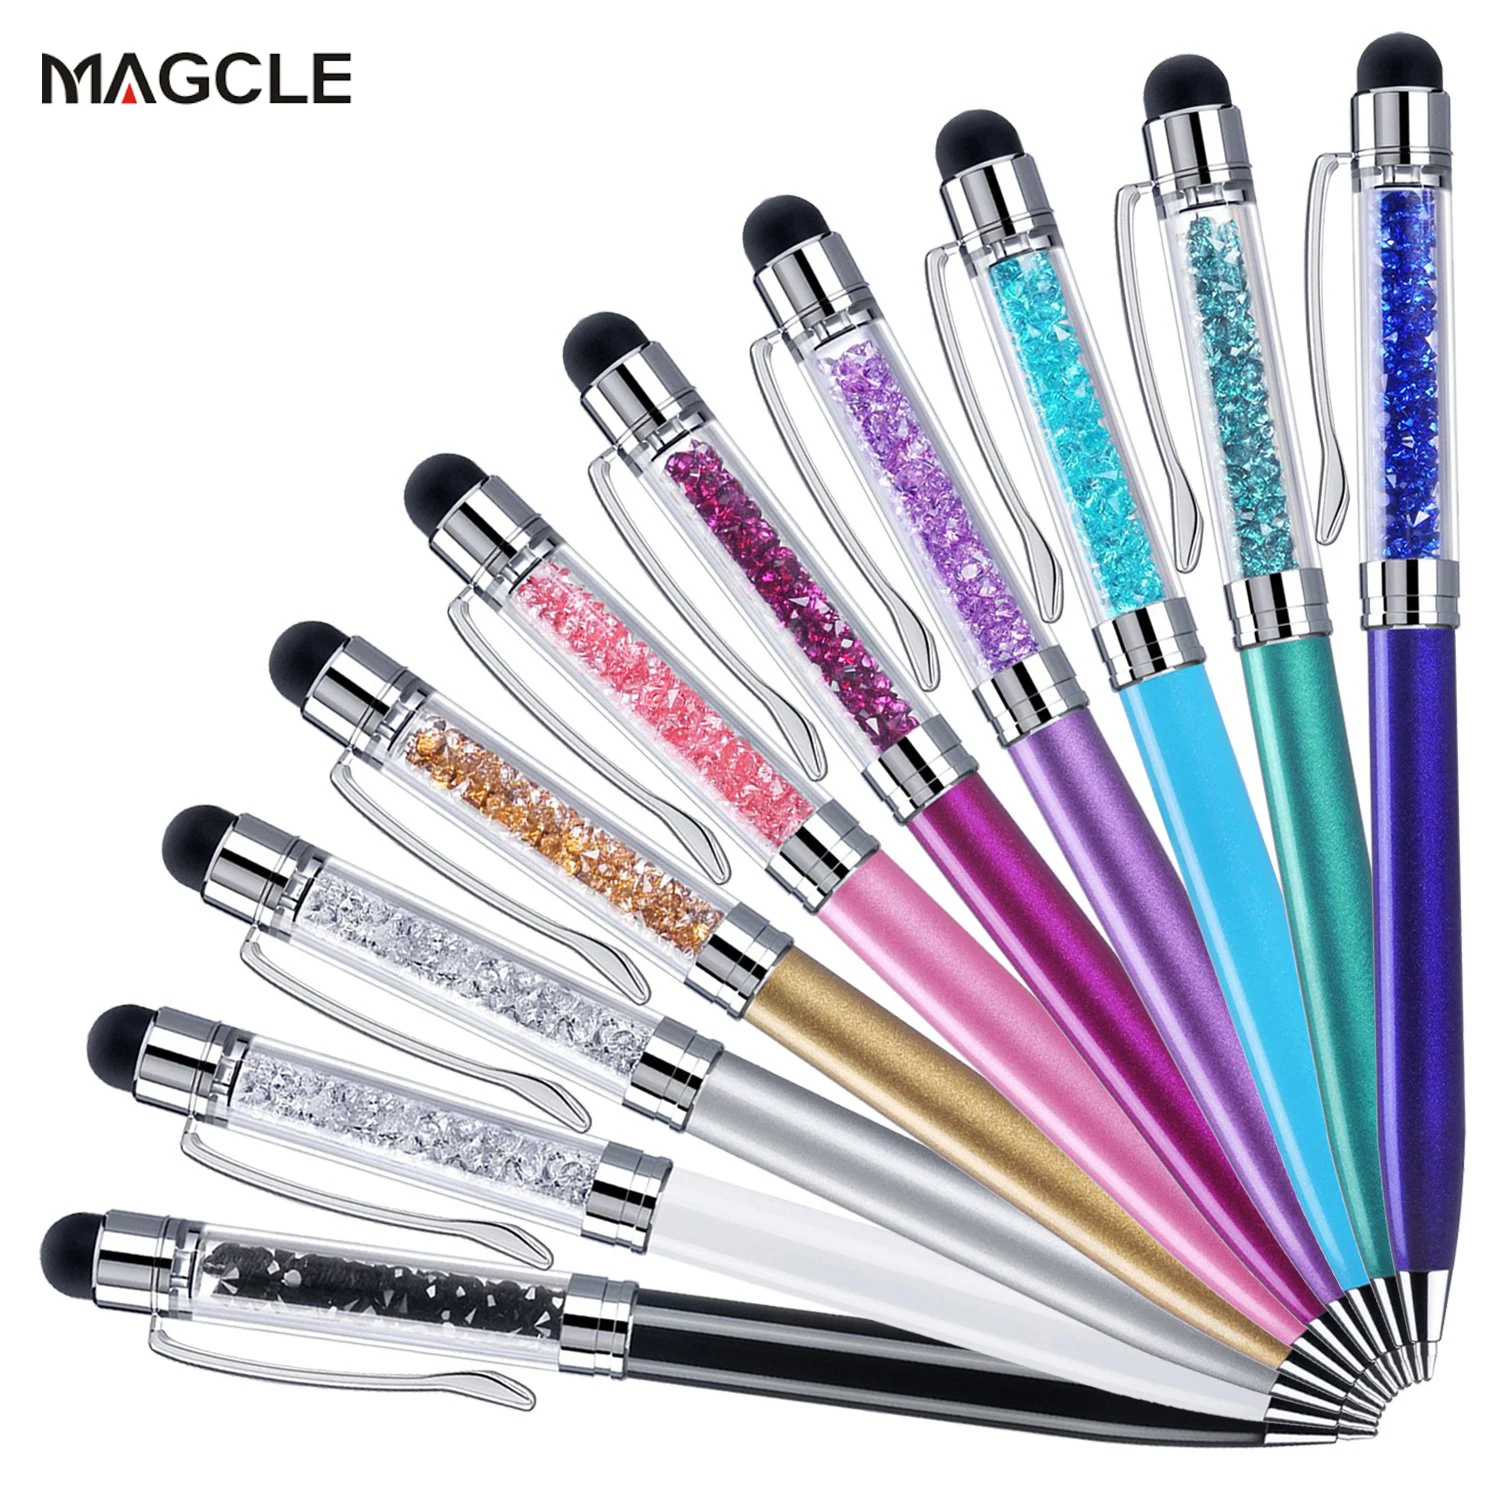 26 Pieces Crystal Ballpoint Pen Crystal Stylus Pen Bling Ballpoint Pens Glitter Diamond Pen 2-in-1 Slim Pens Capacitive Writing Pens for Touch Screens Office Cold Colors School Stationery Supplie 